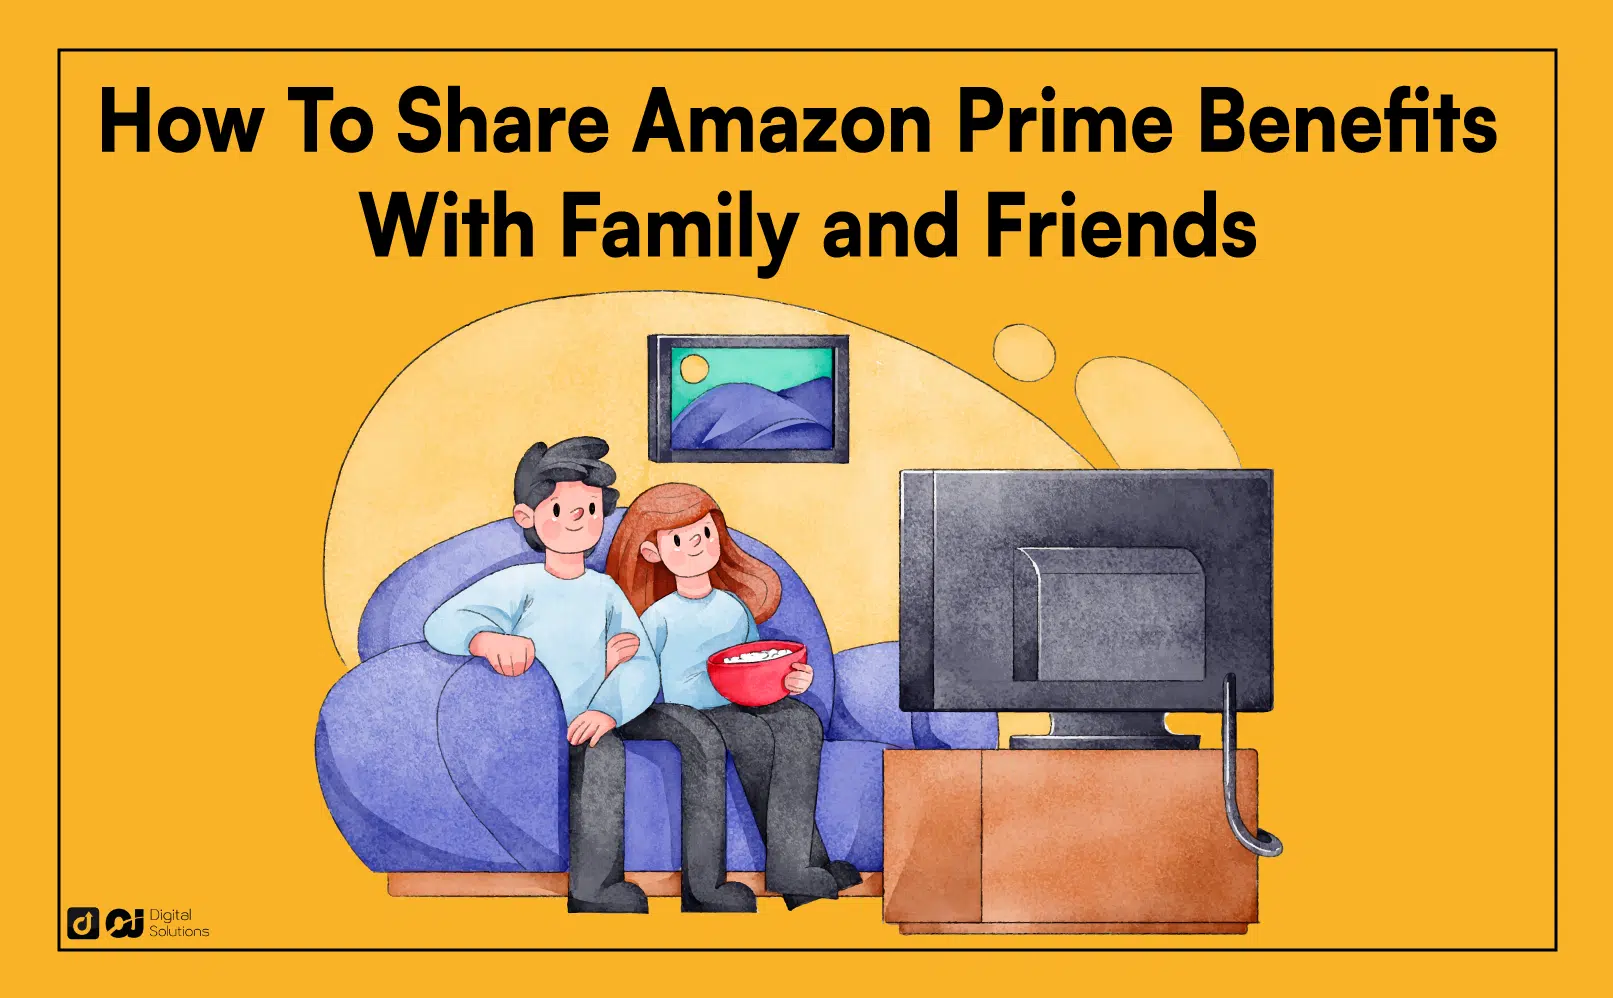 Household: How to share Prime benefits with family and friends